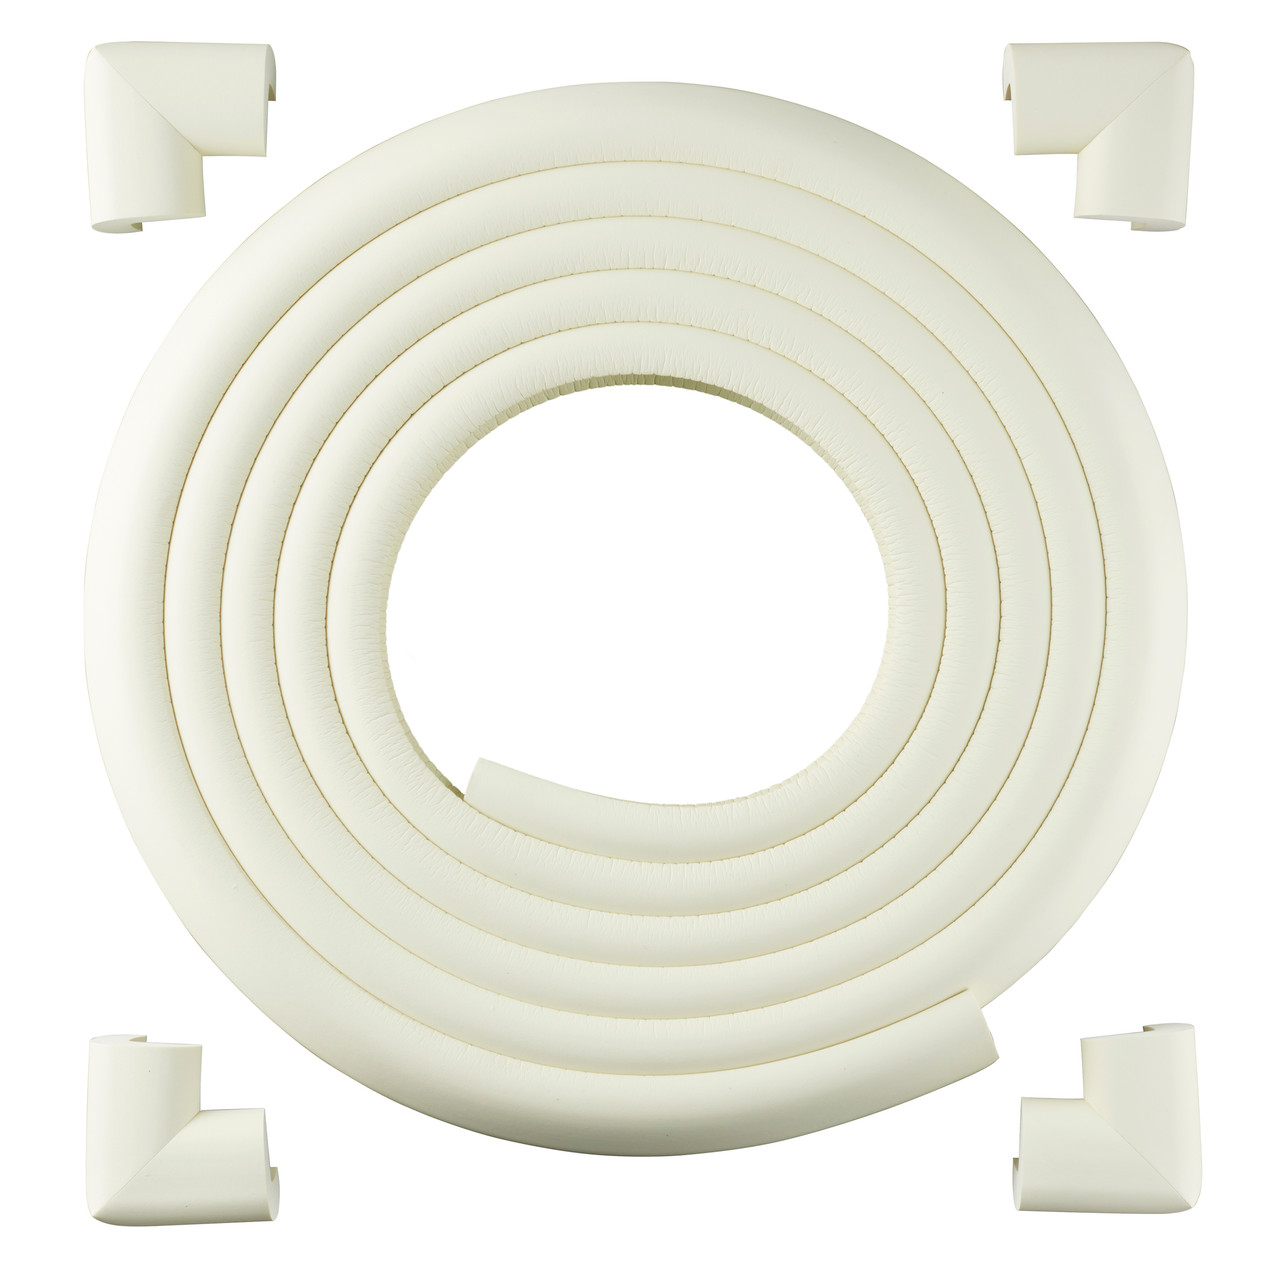 Foam Edge Guards for Baby Proofing | Evenflo Official Site